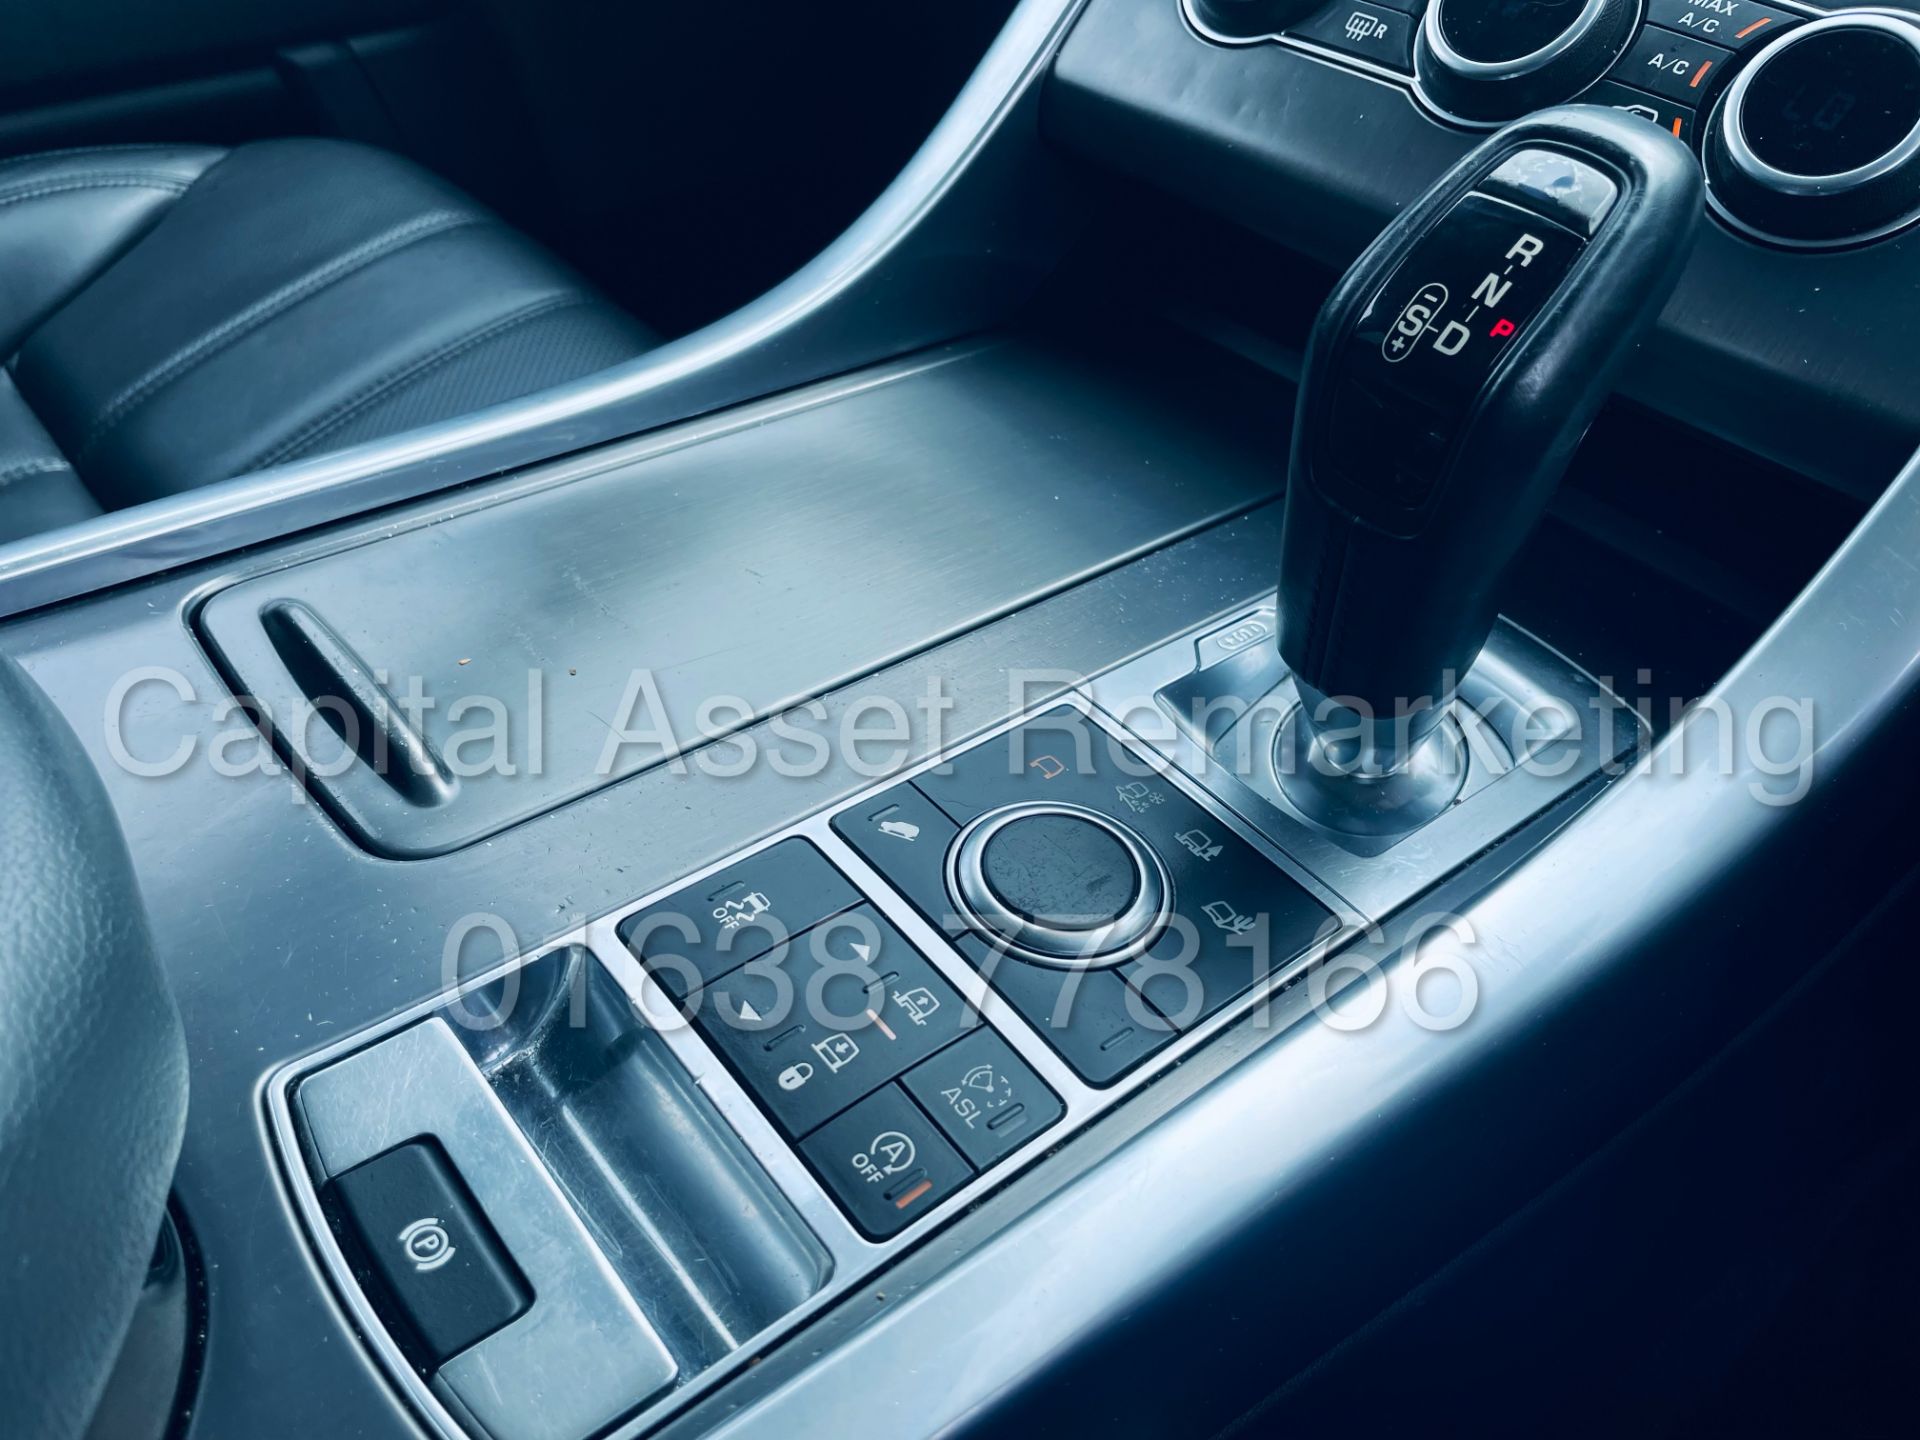 (On Sale) RANGE ROVER SPORT *SPECIAL EDITION* (2014 - FACELIFT) '3.0 TDV6 - AUTO' *NAV & PAN ROOF* - Image 48 of 54